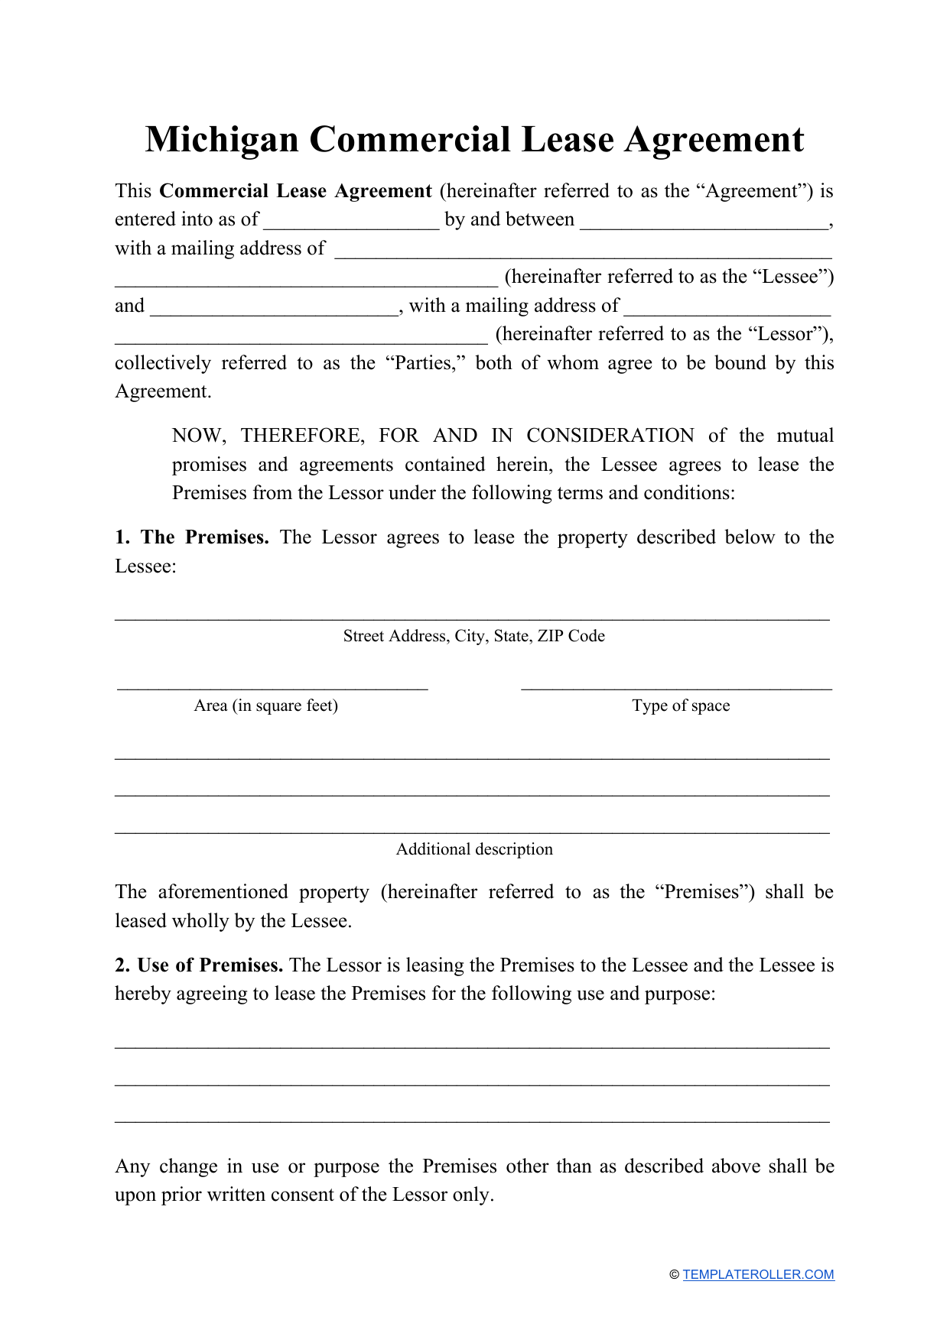 Michigan Commercial Lease Agreement Template Fill Out Sign Online 